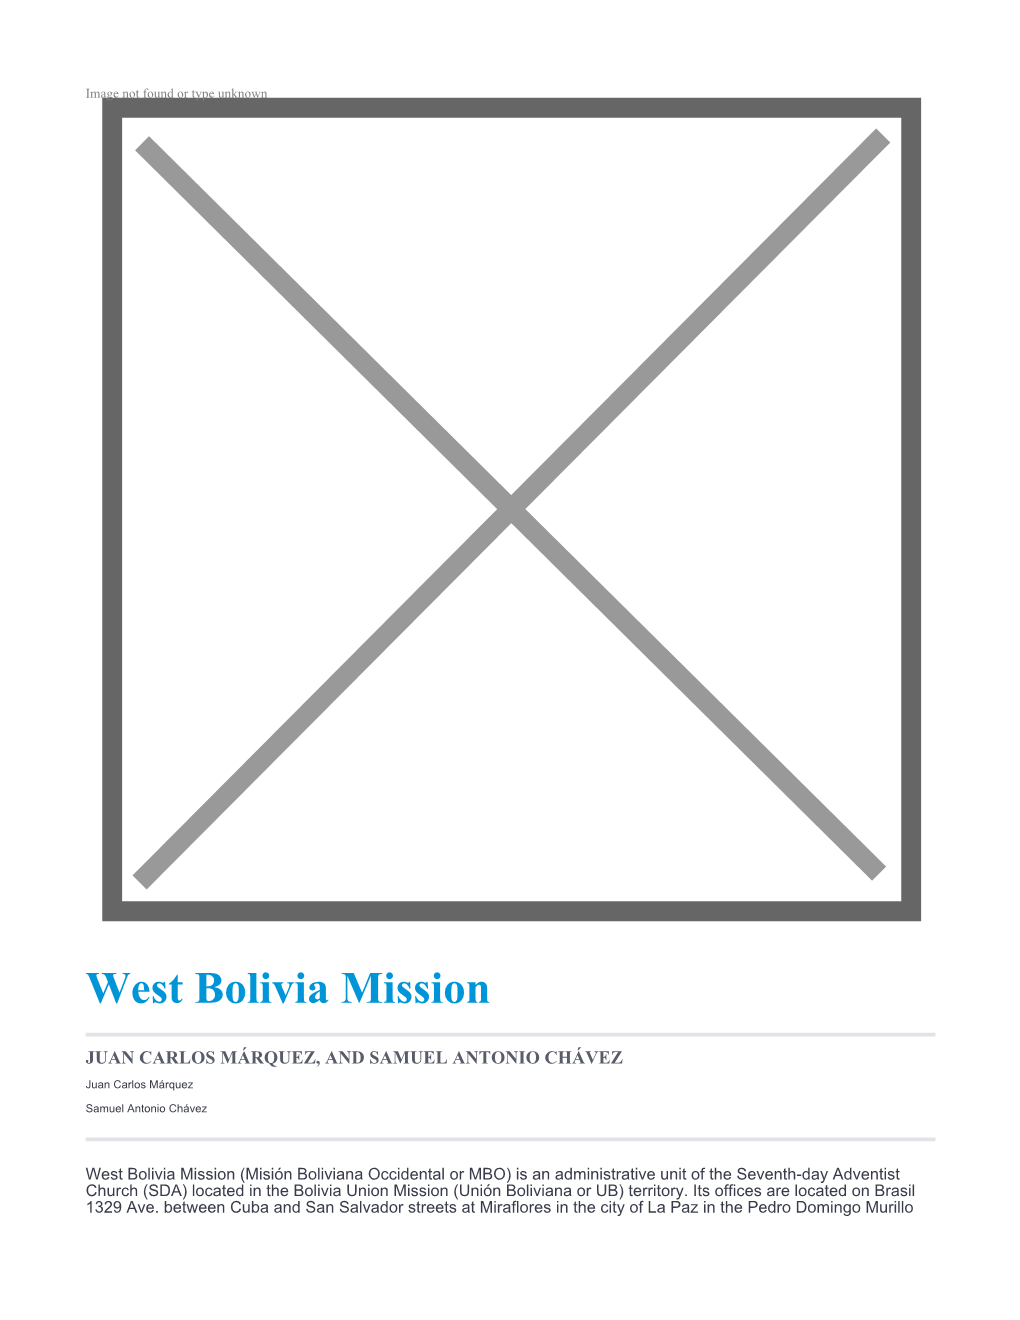 West Bolivia Mission